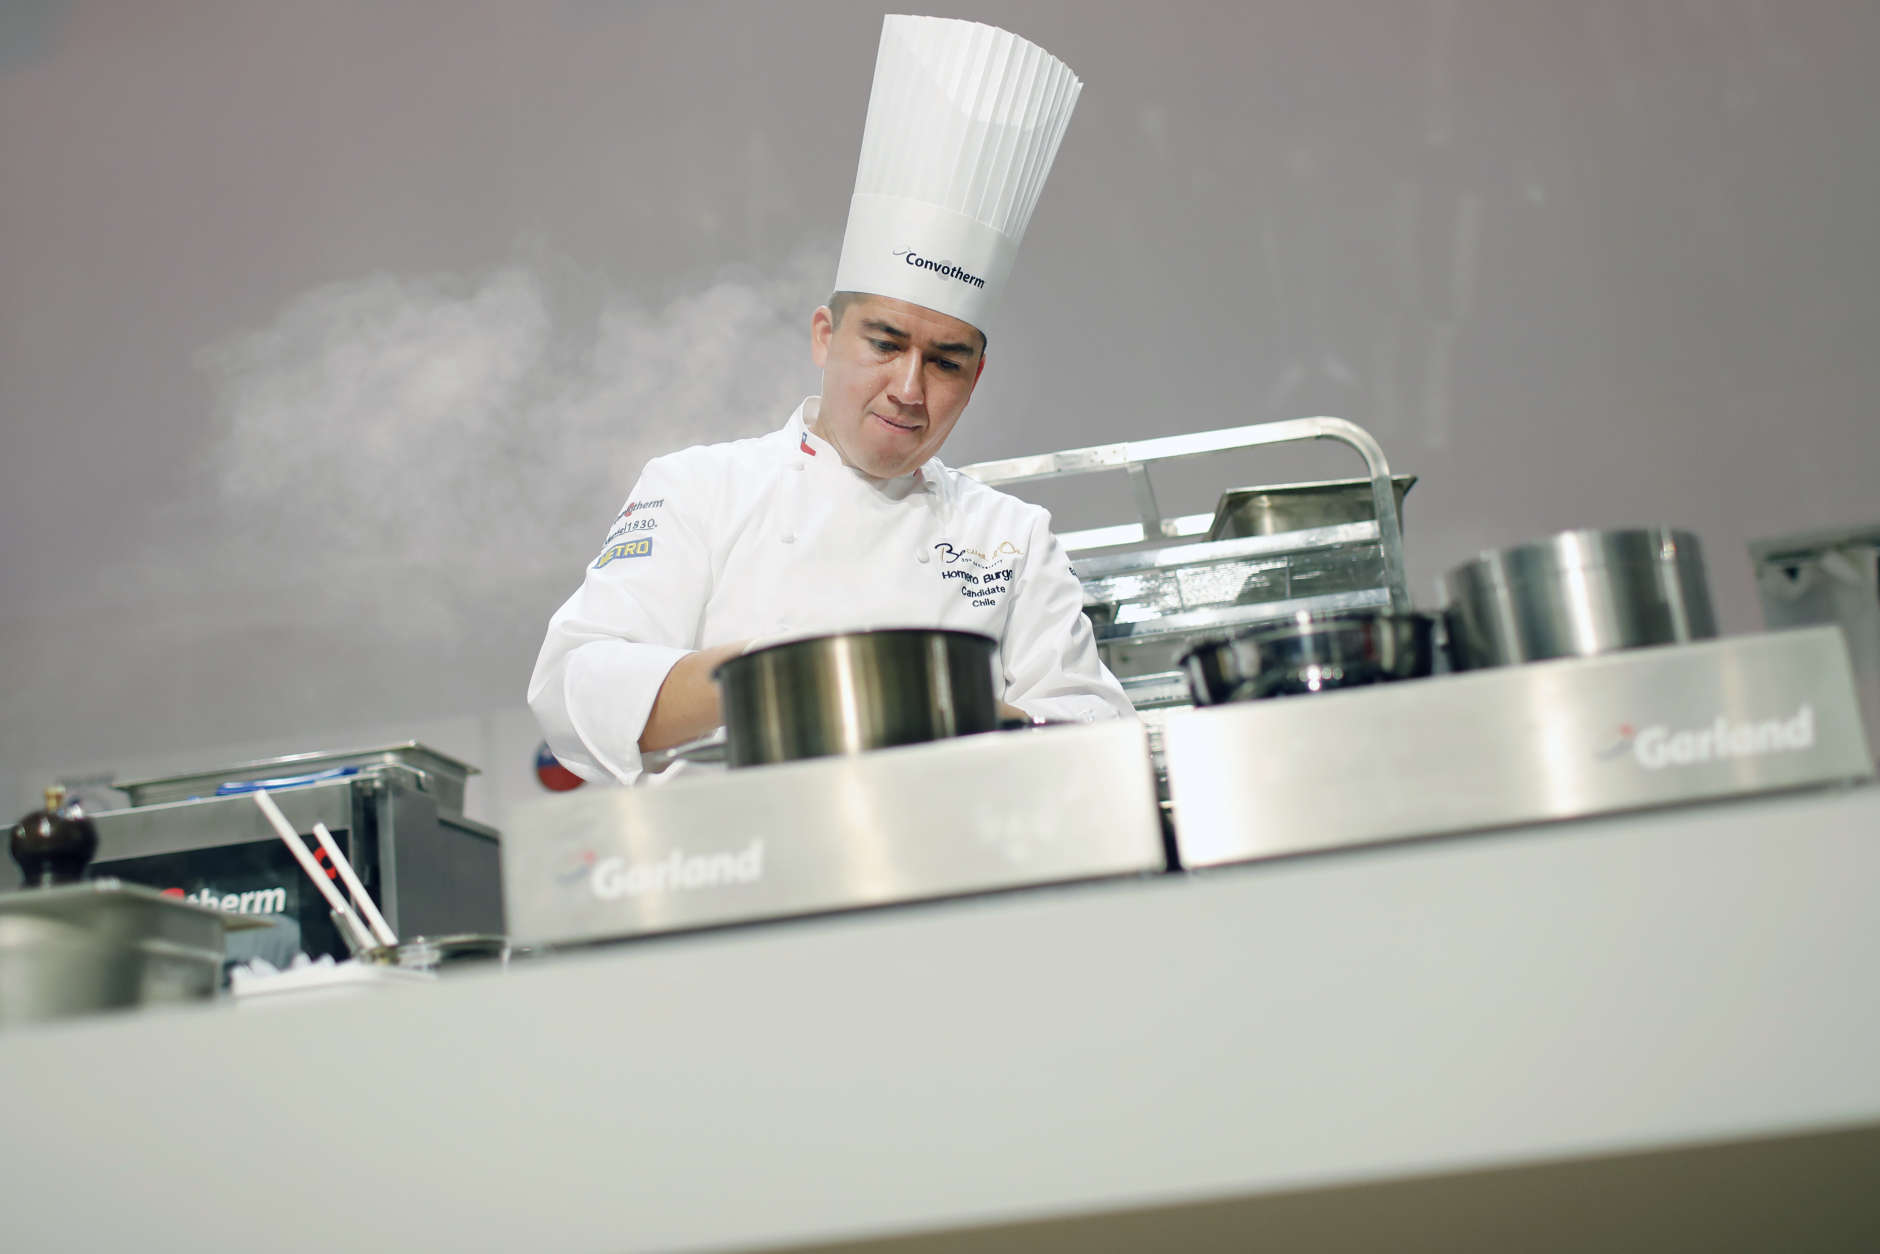 Homero Antonio Burgos Olmos, of Chile, prepares food during the "Bocuse d'Or" (Golden Bocuse) trophy, in Lyon, central France, Tuesday, Jan. 24, 2017. The contest, a sort of world cup of the cuisine, was started in 1987 by Lyon chef Paul Bocuse to reward young international culinary talents. (AP Photo/Laurent Cipriani)